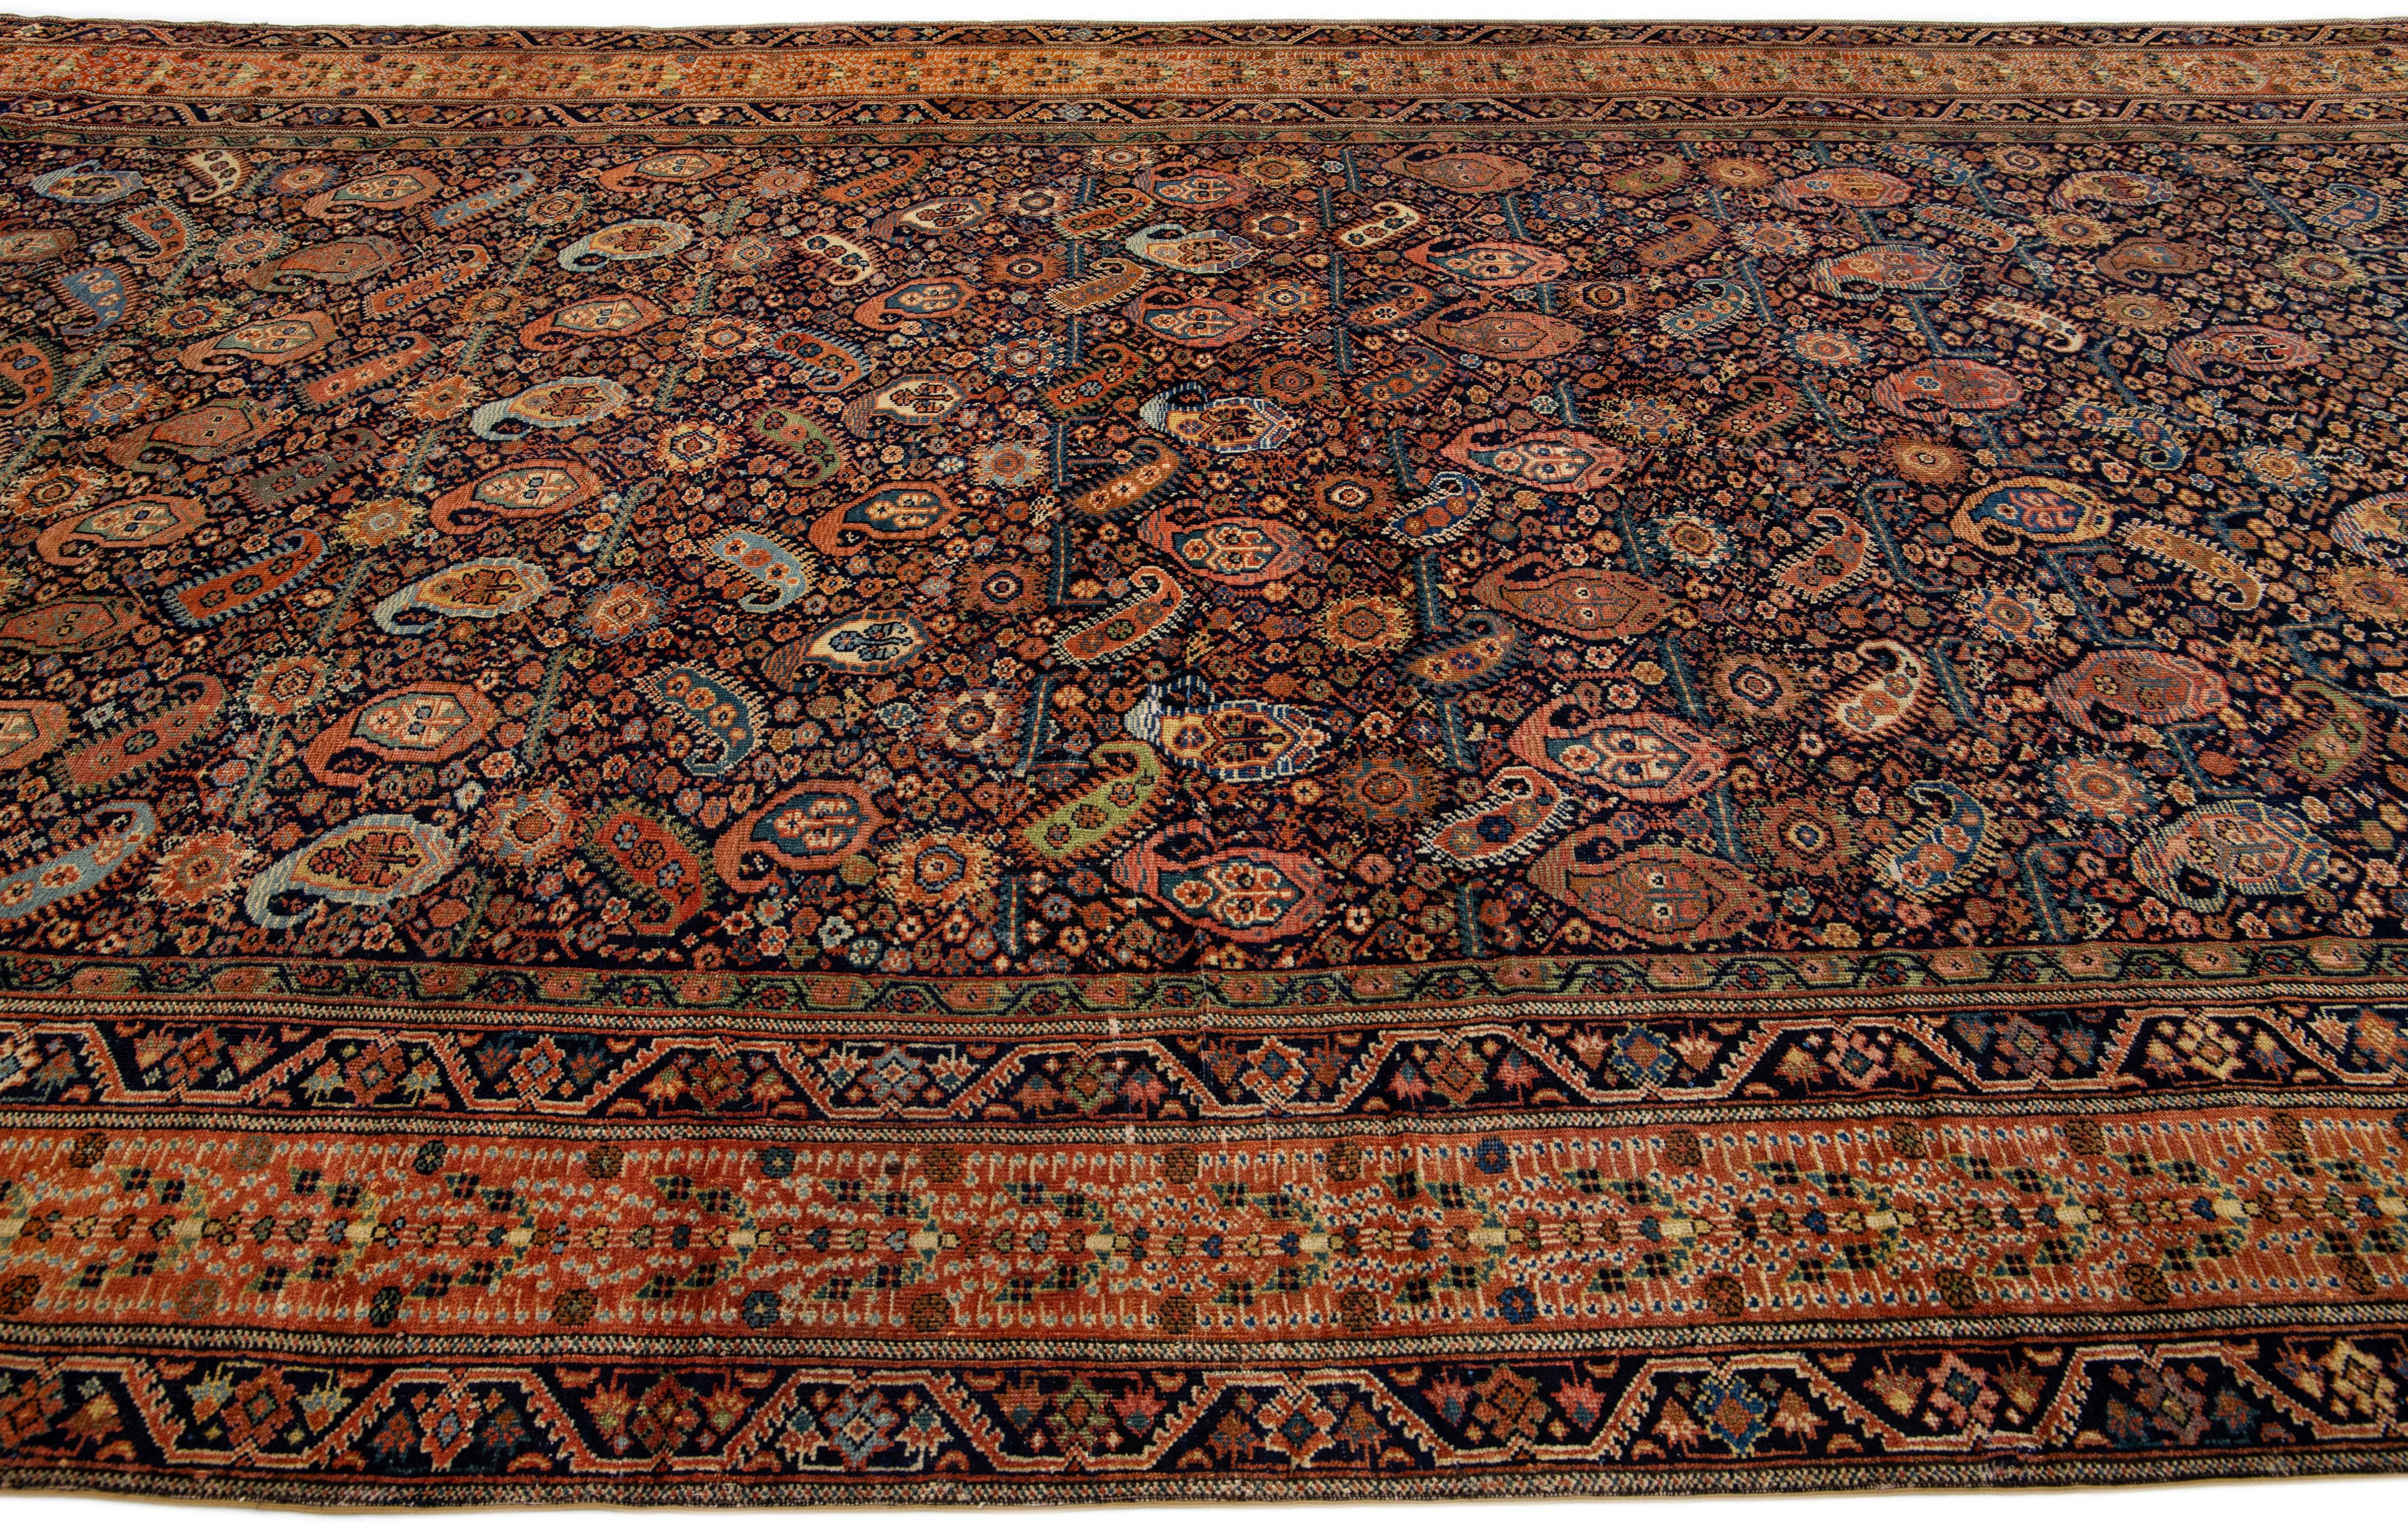 Multicolor Antique Farahan Persian Wool Rug with Boteh Motif In Good Condition For Sale In Norwalk, CT